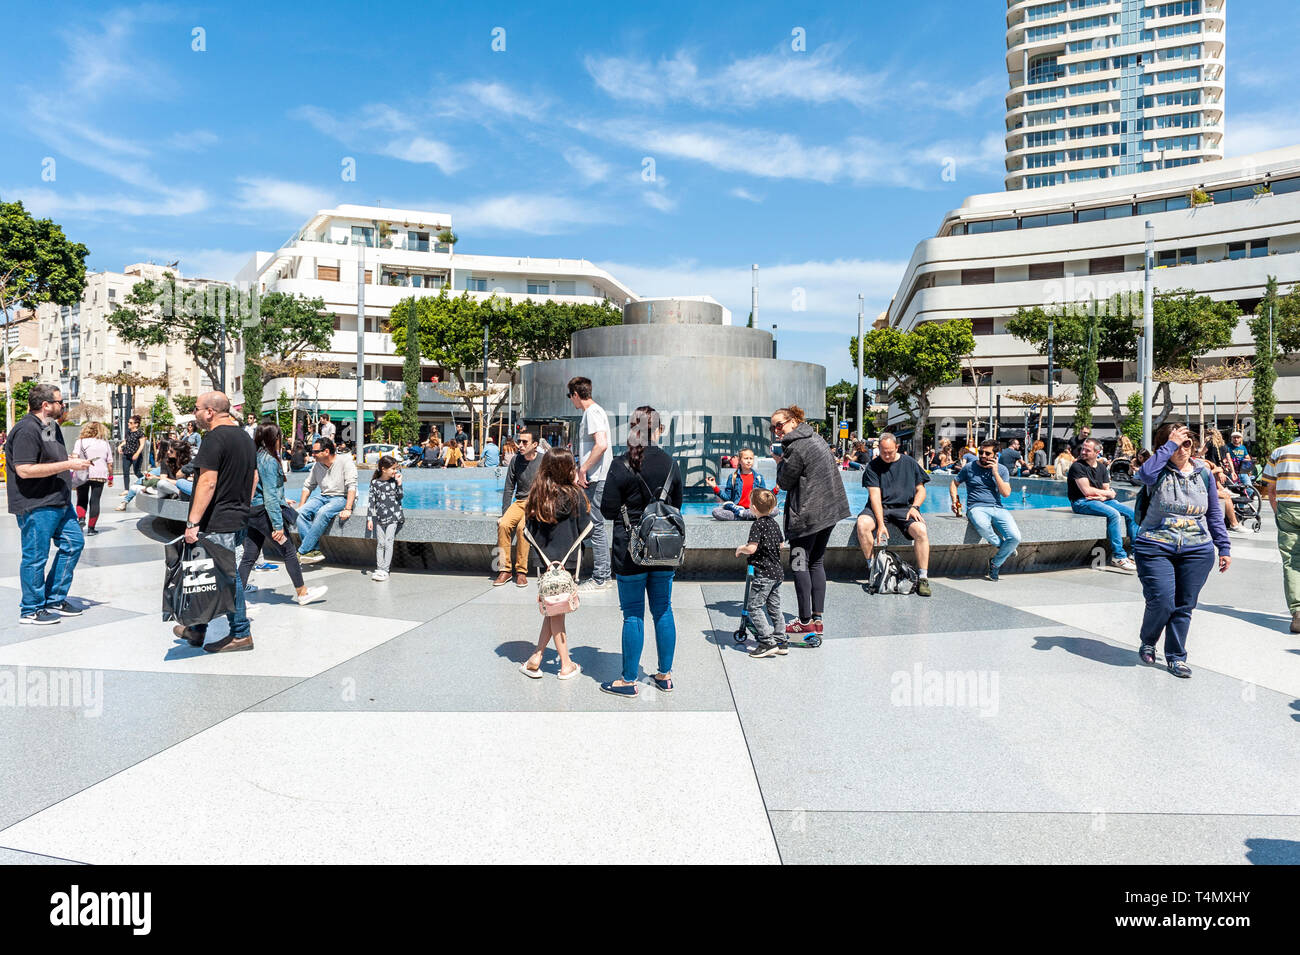 Israel, Tel Aviv-Yafo - 12 April 2019: The new Kikar Dizengoff square - Agams Fire and Water fountain is not yet fully restored Stock Photo